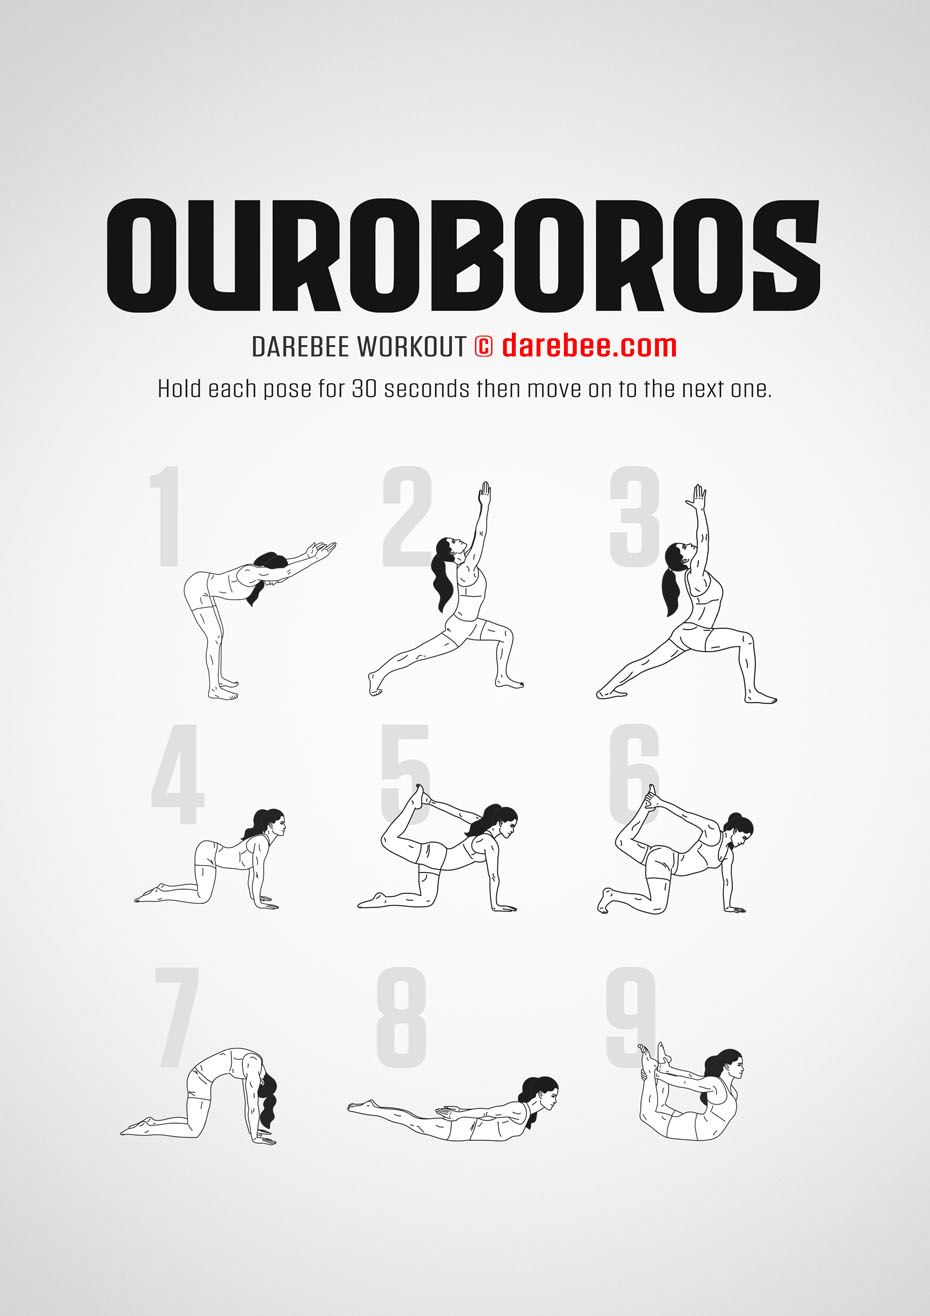 Ouroboros is a Darebee home fitness workout that helps you develop flexibility, agility and great muscle control over your own body.